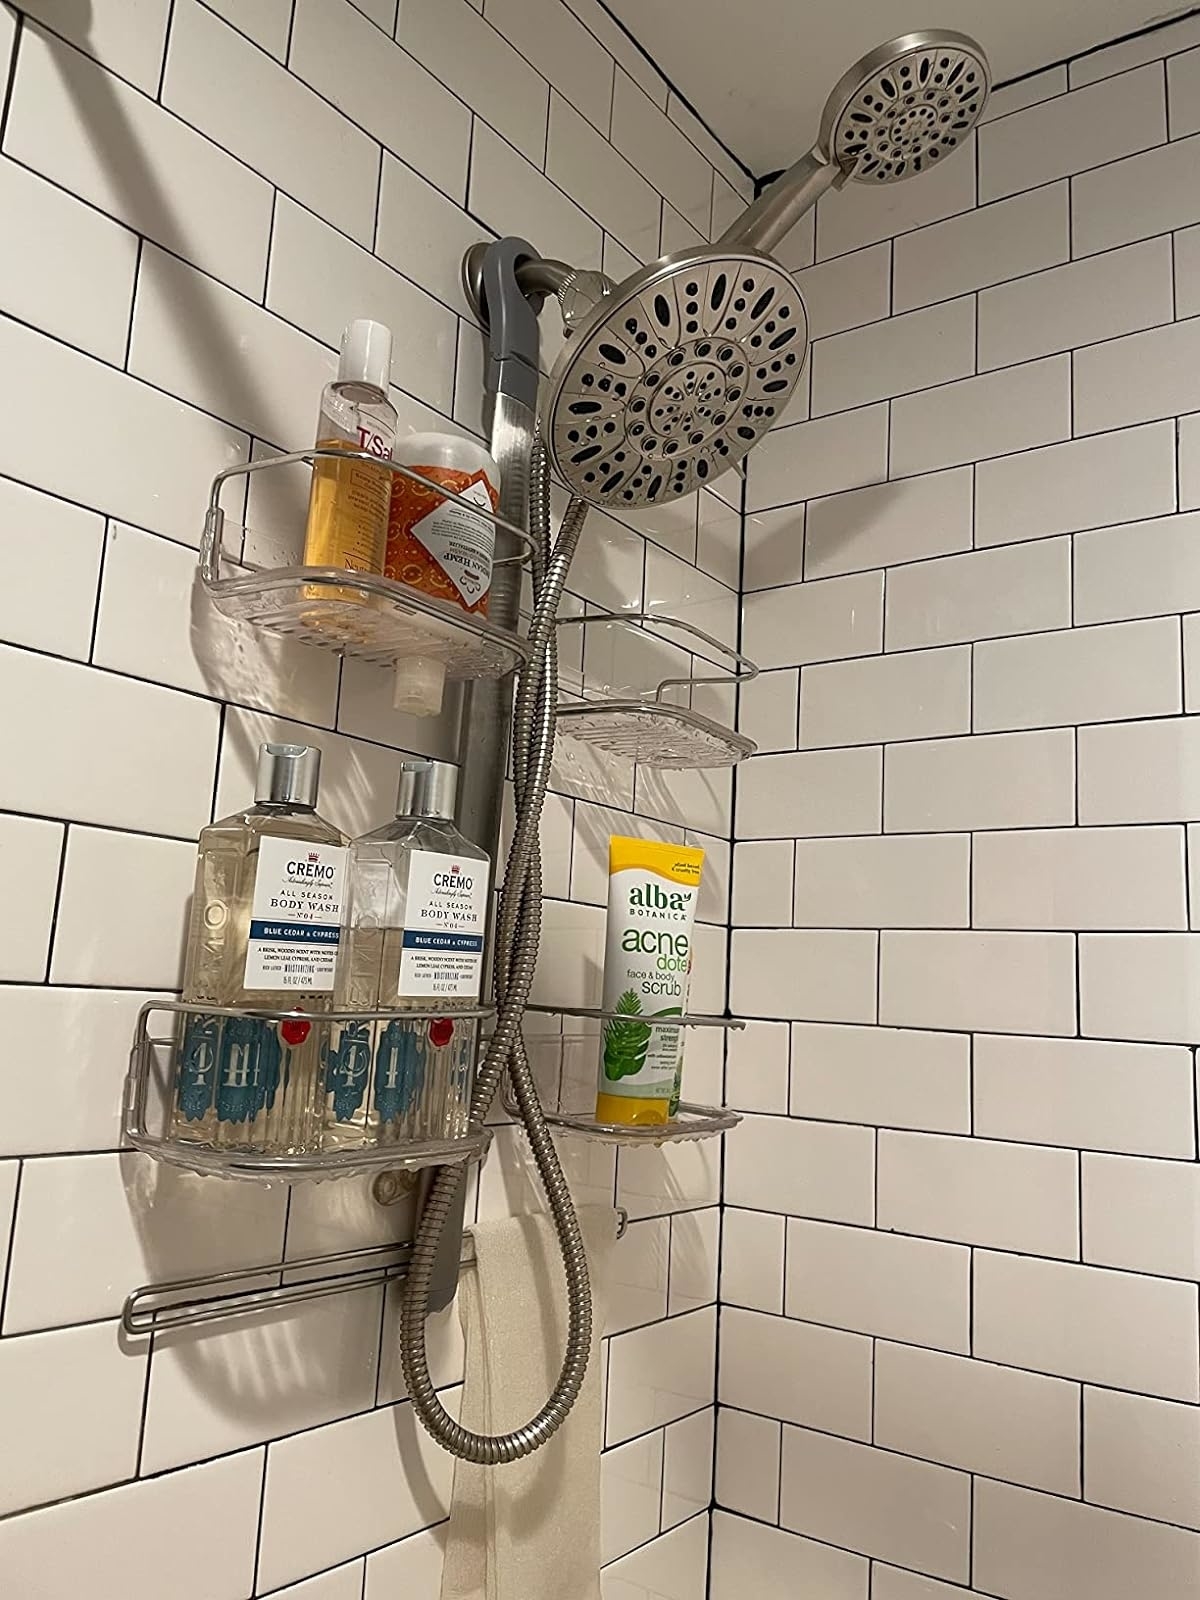 Reviewer image of the shower head on the wall in their bathroom